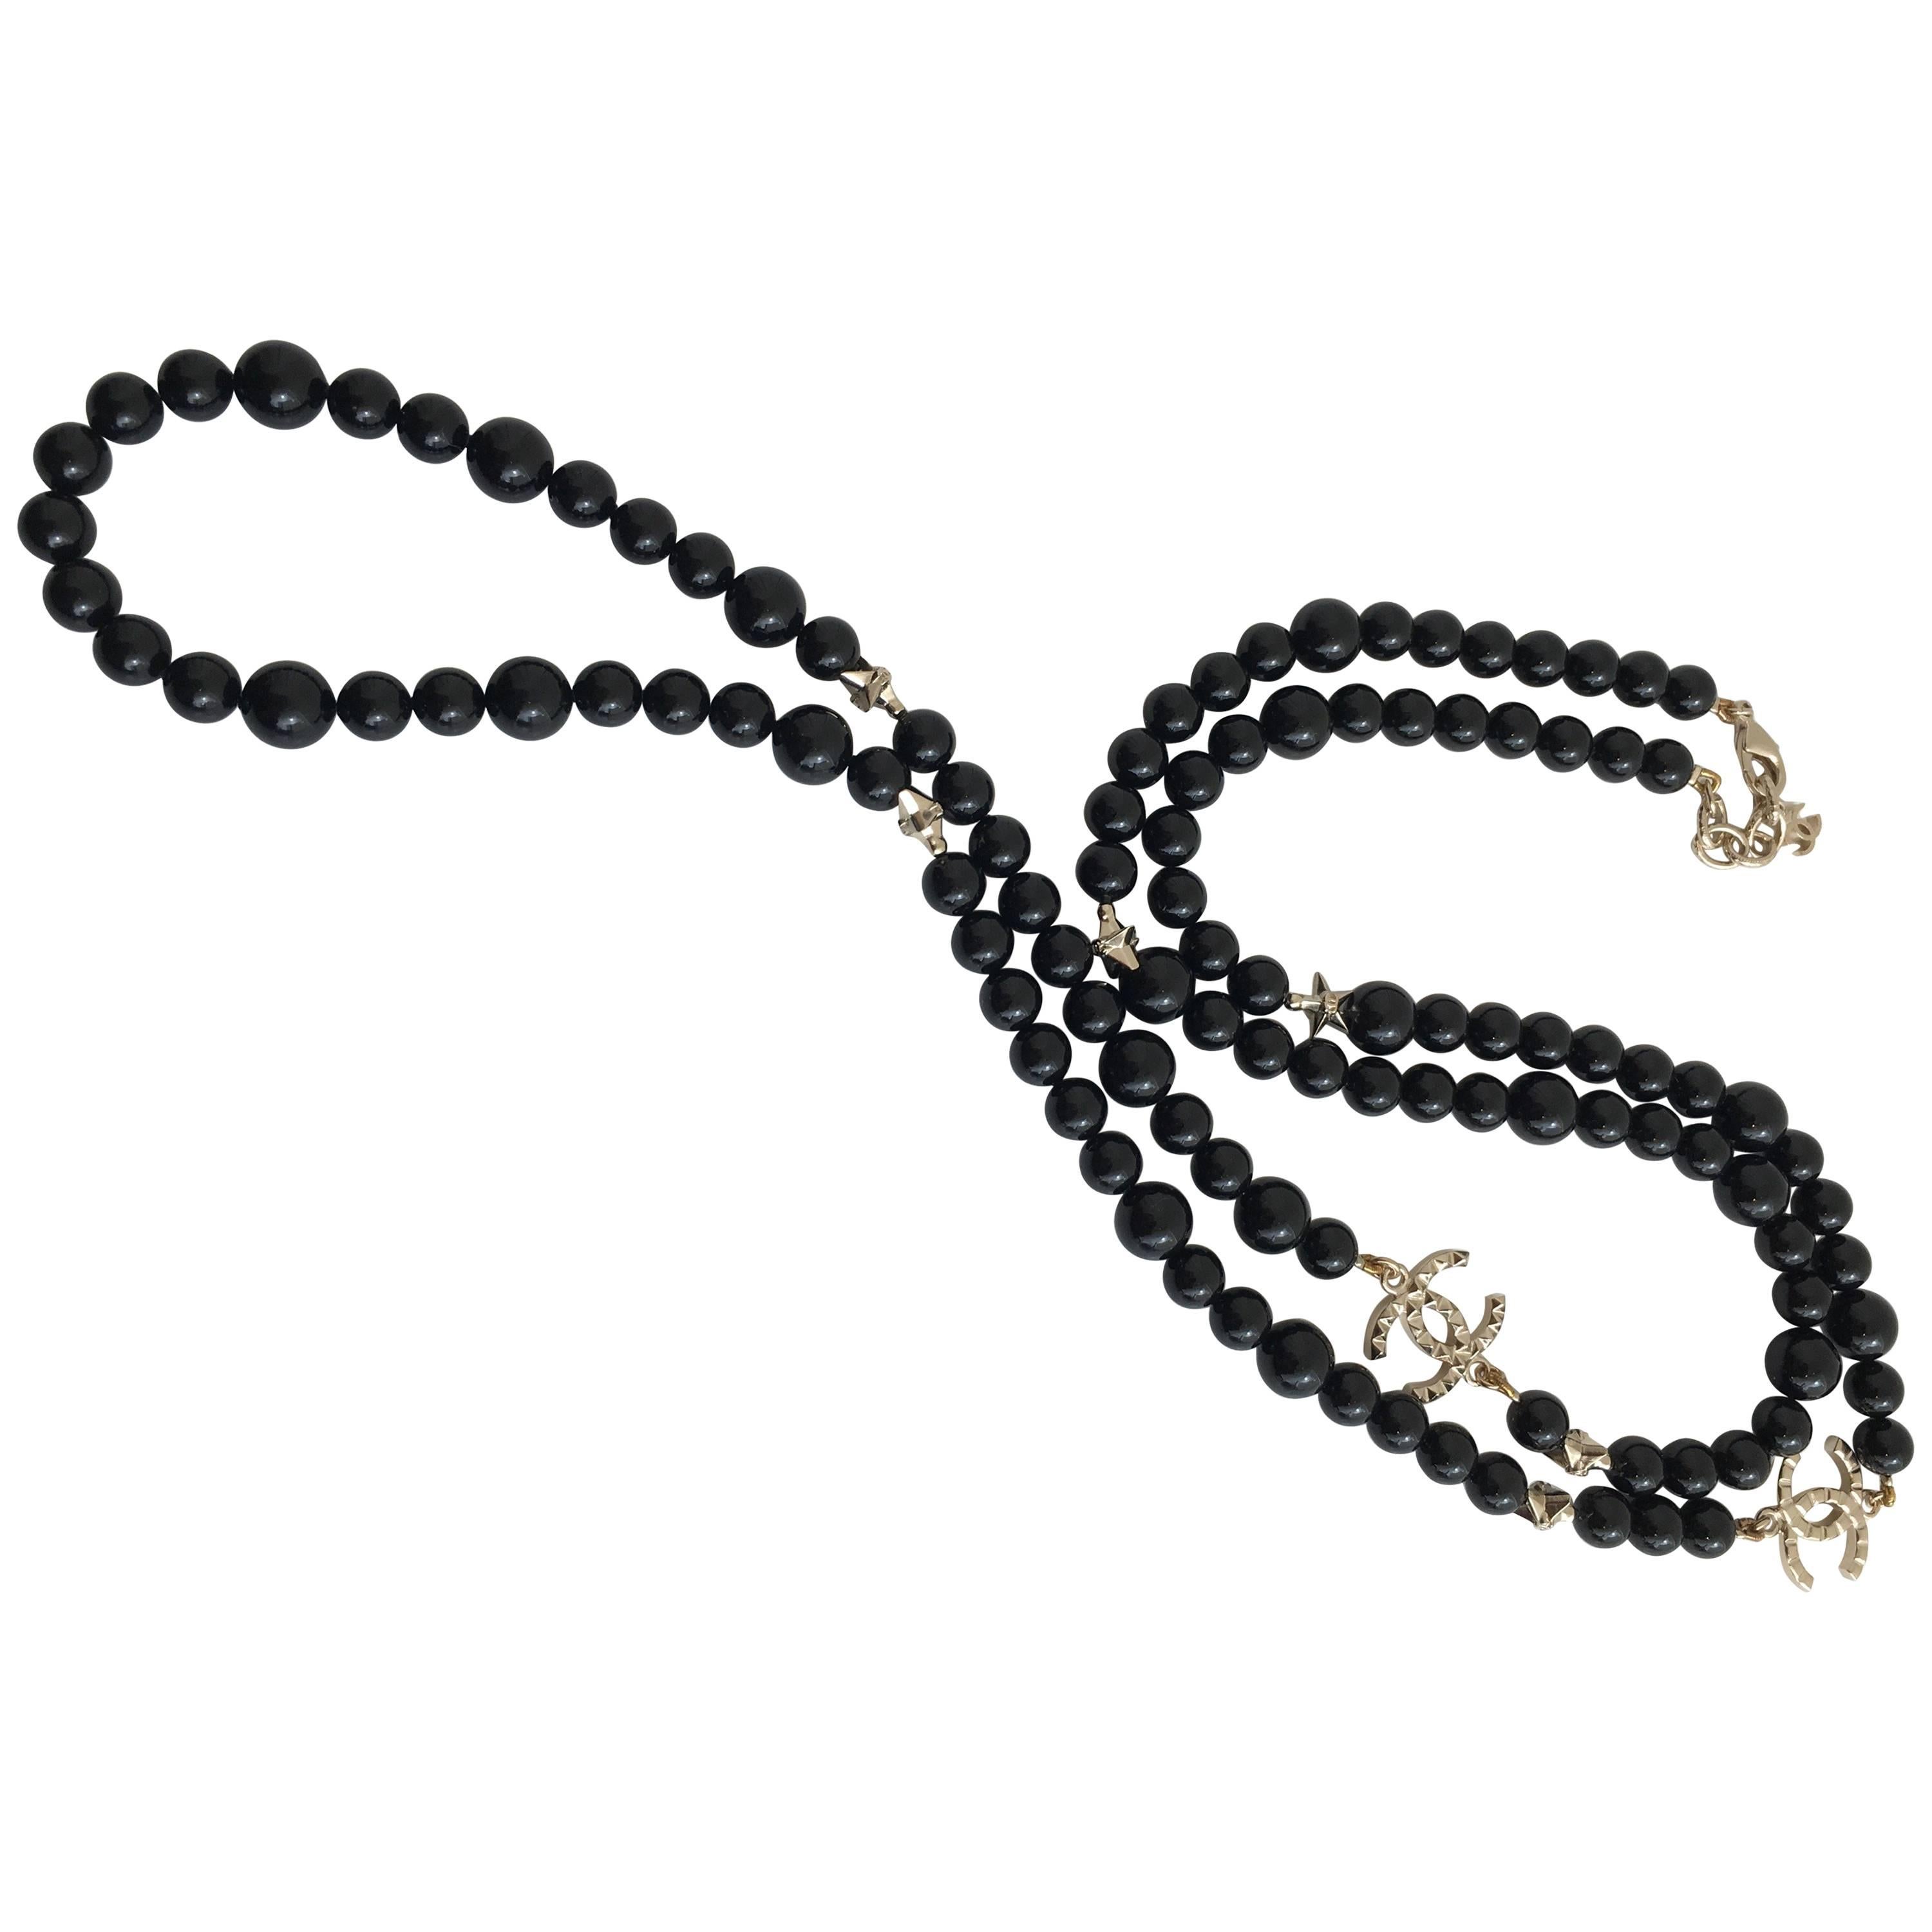 Chanel Black Beaded Necklace, Muted Gold Metal Beads and Metallic CC Logo